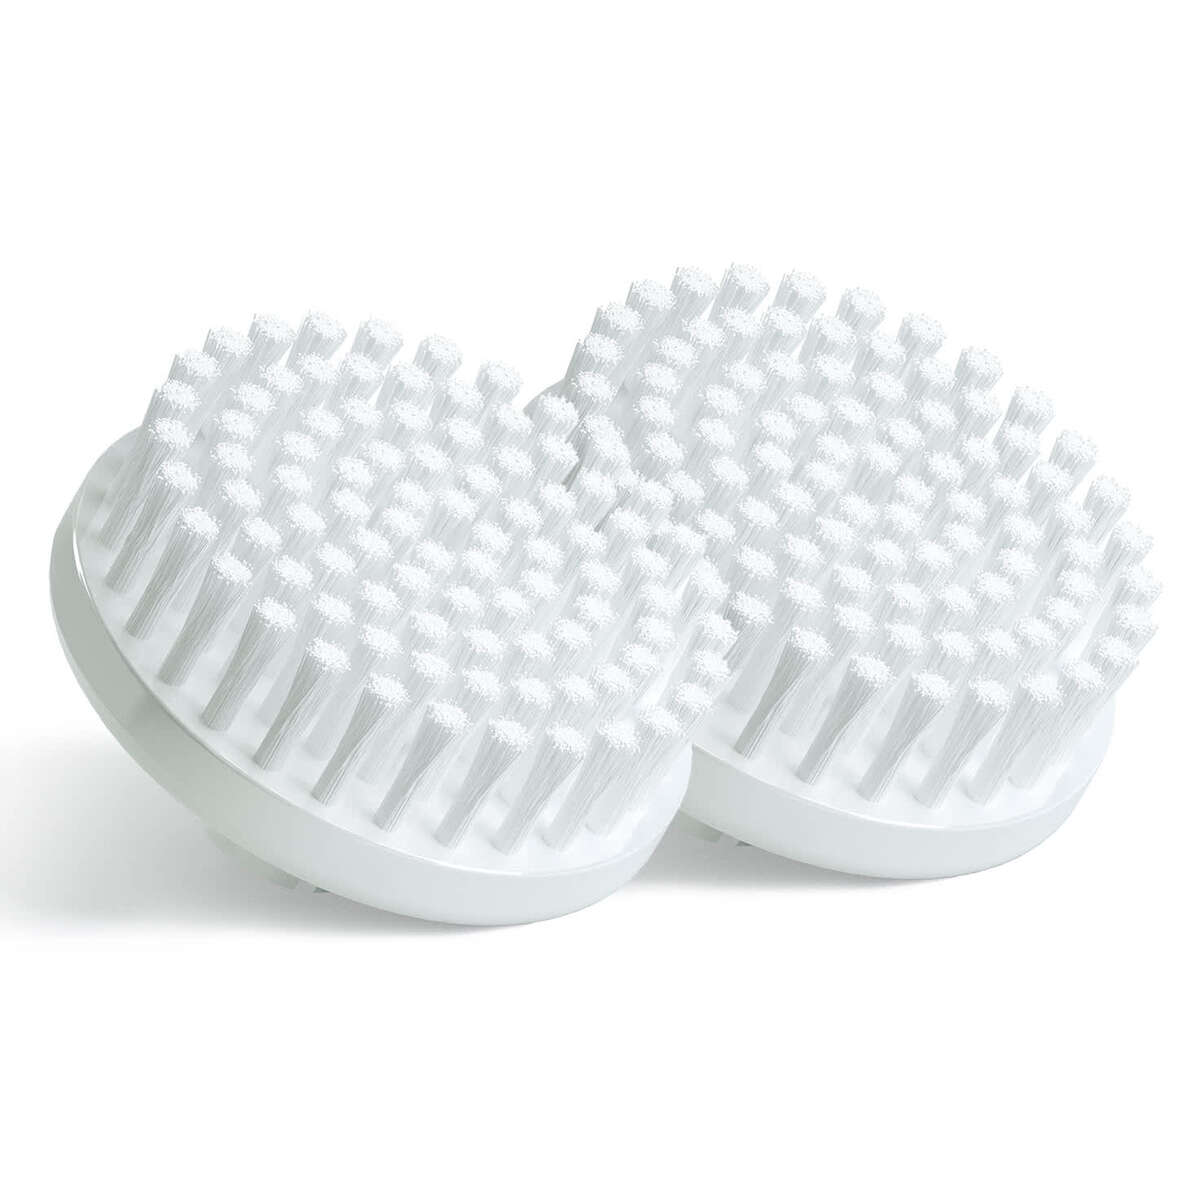 Braun Se80 Face Replacement Cleansing Brush Refill 2 Count